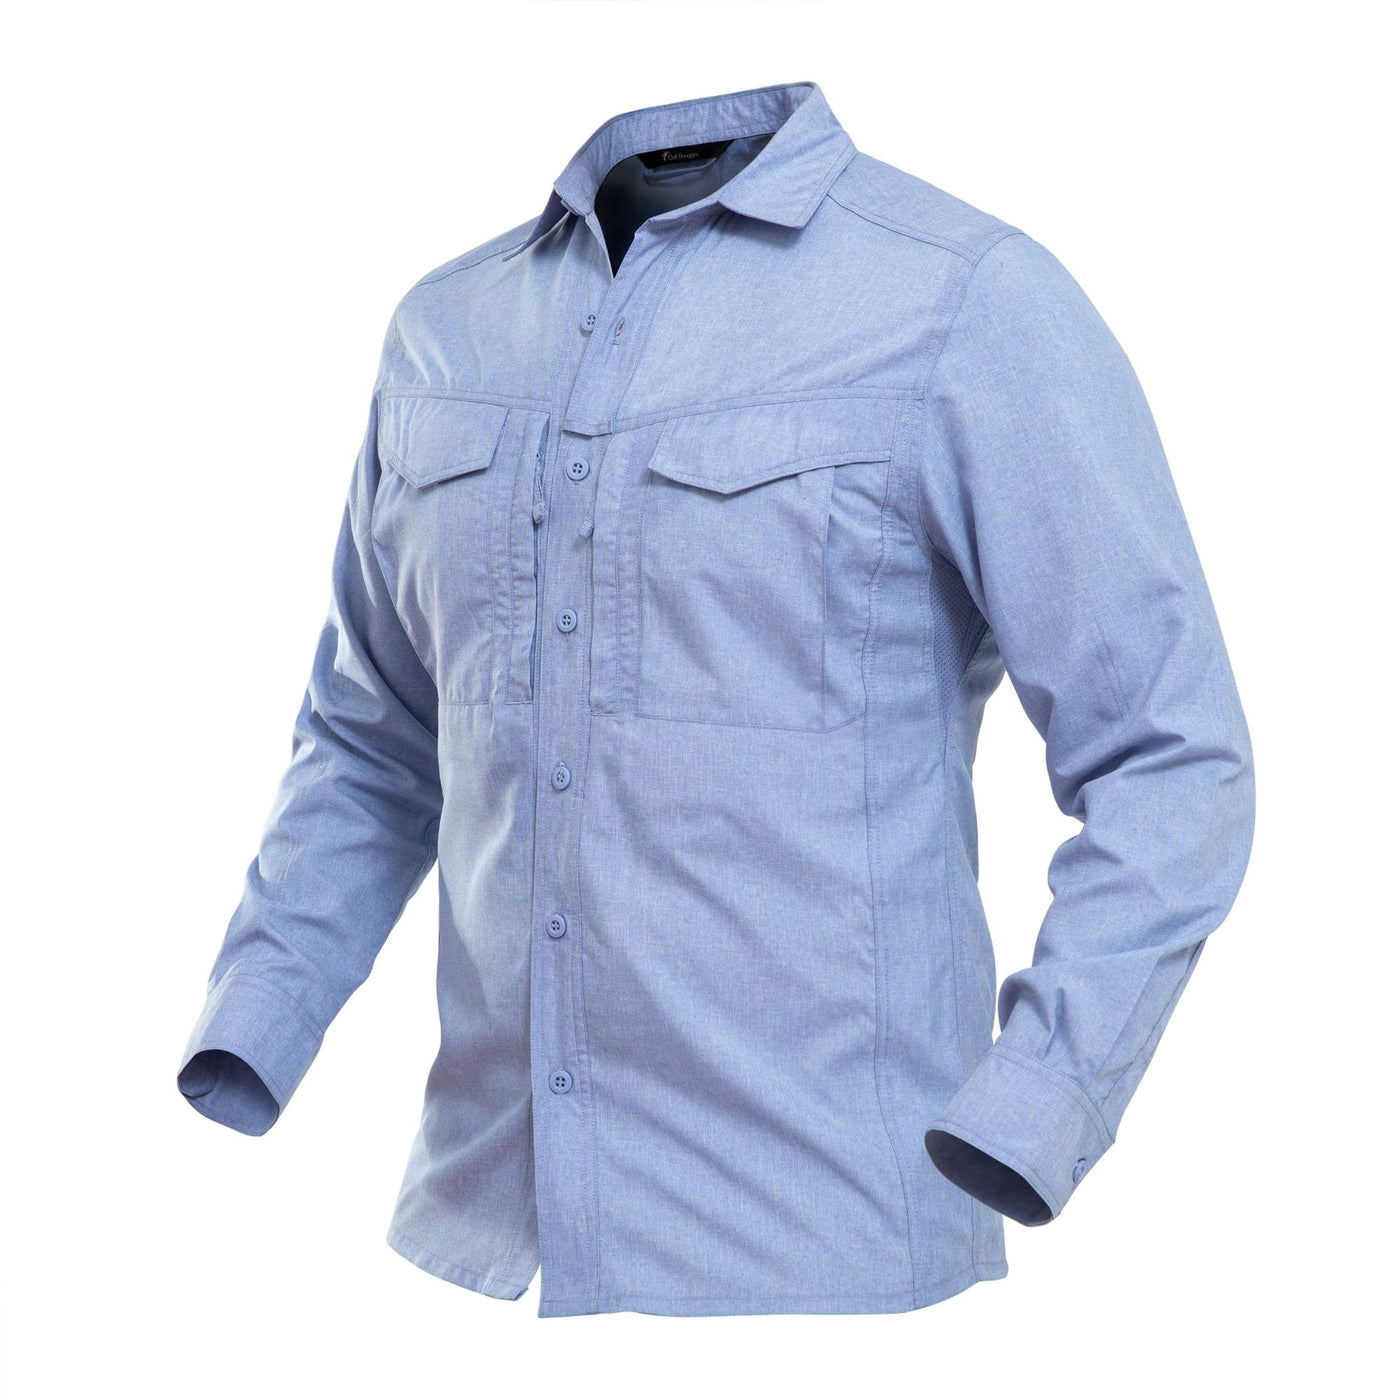 Breathable Outdoor Tactical Shirt